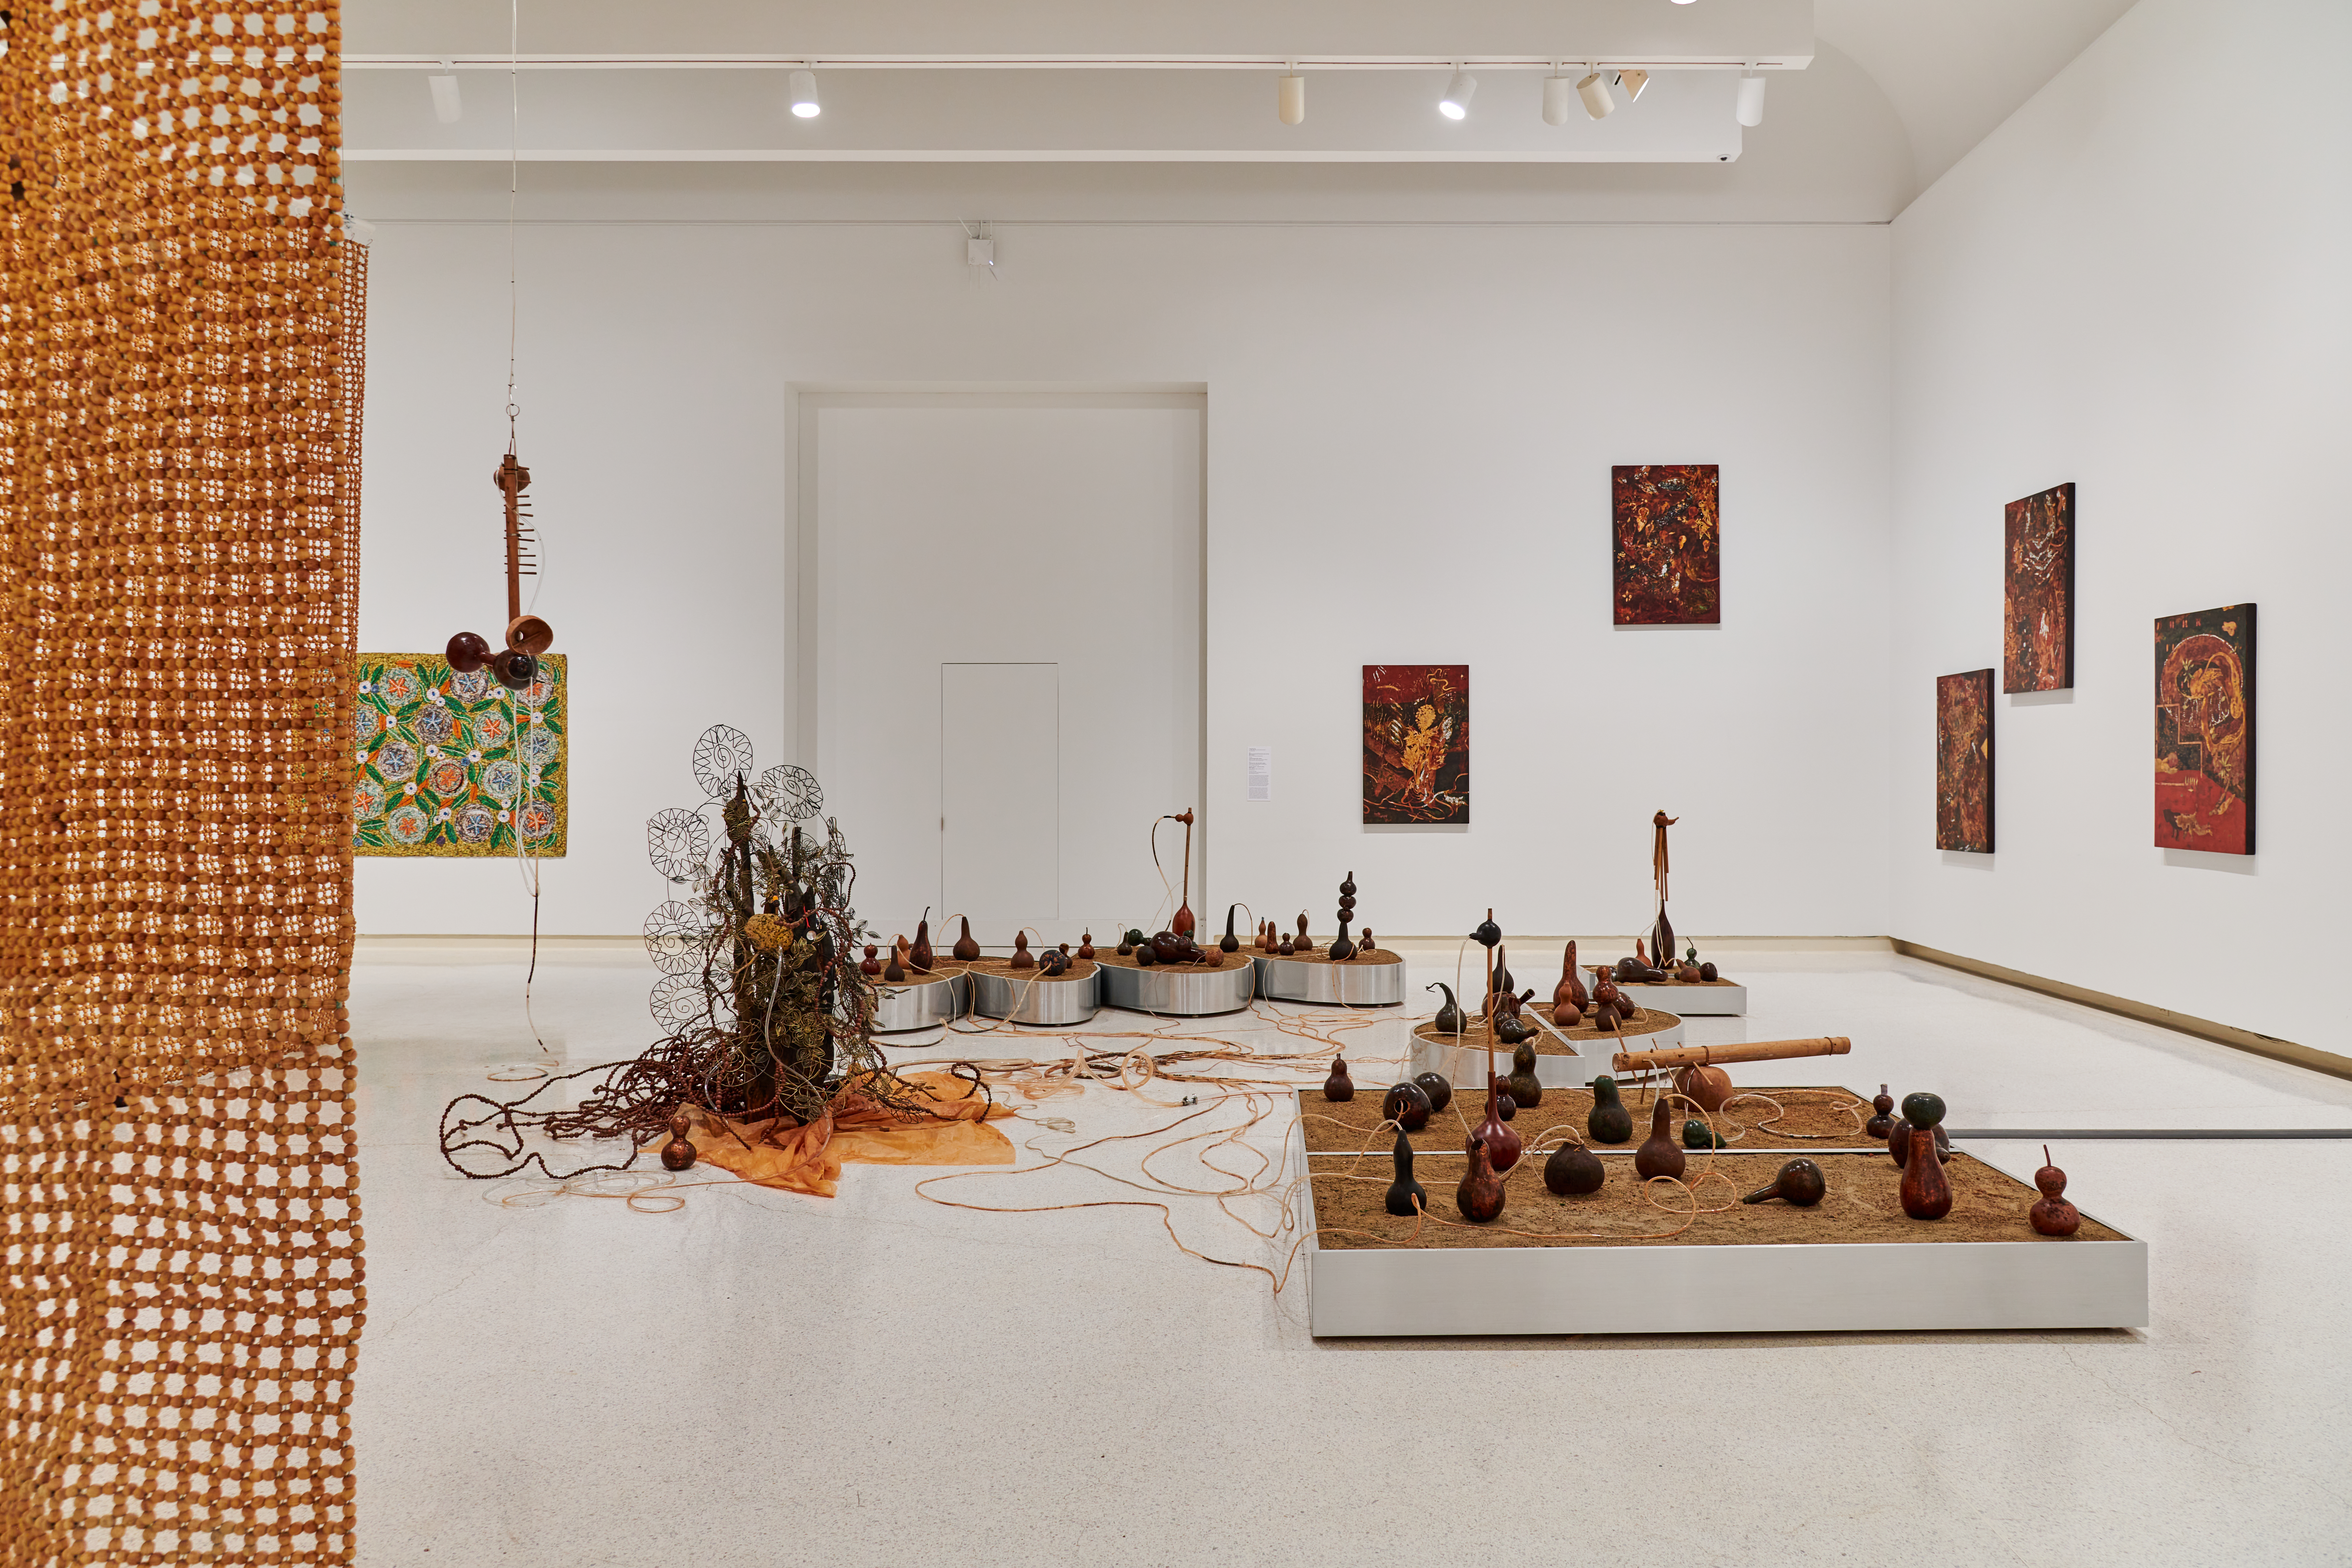 Installation view of the 58th Carnegie International featuring works by Trương Công Tùng